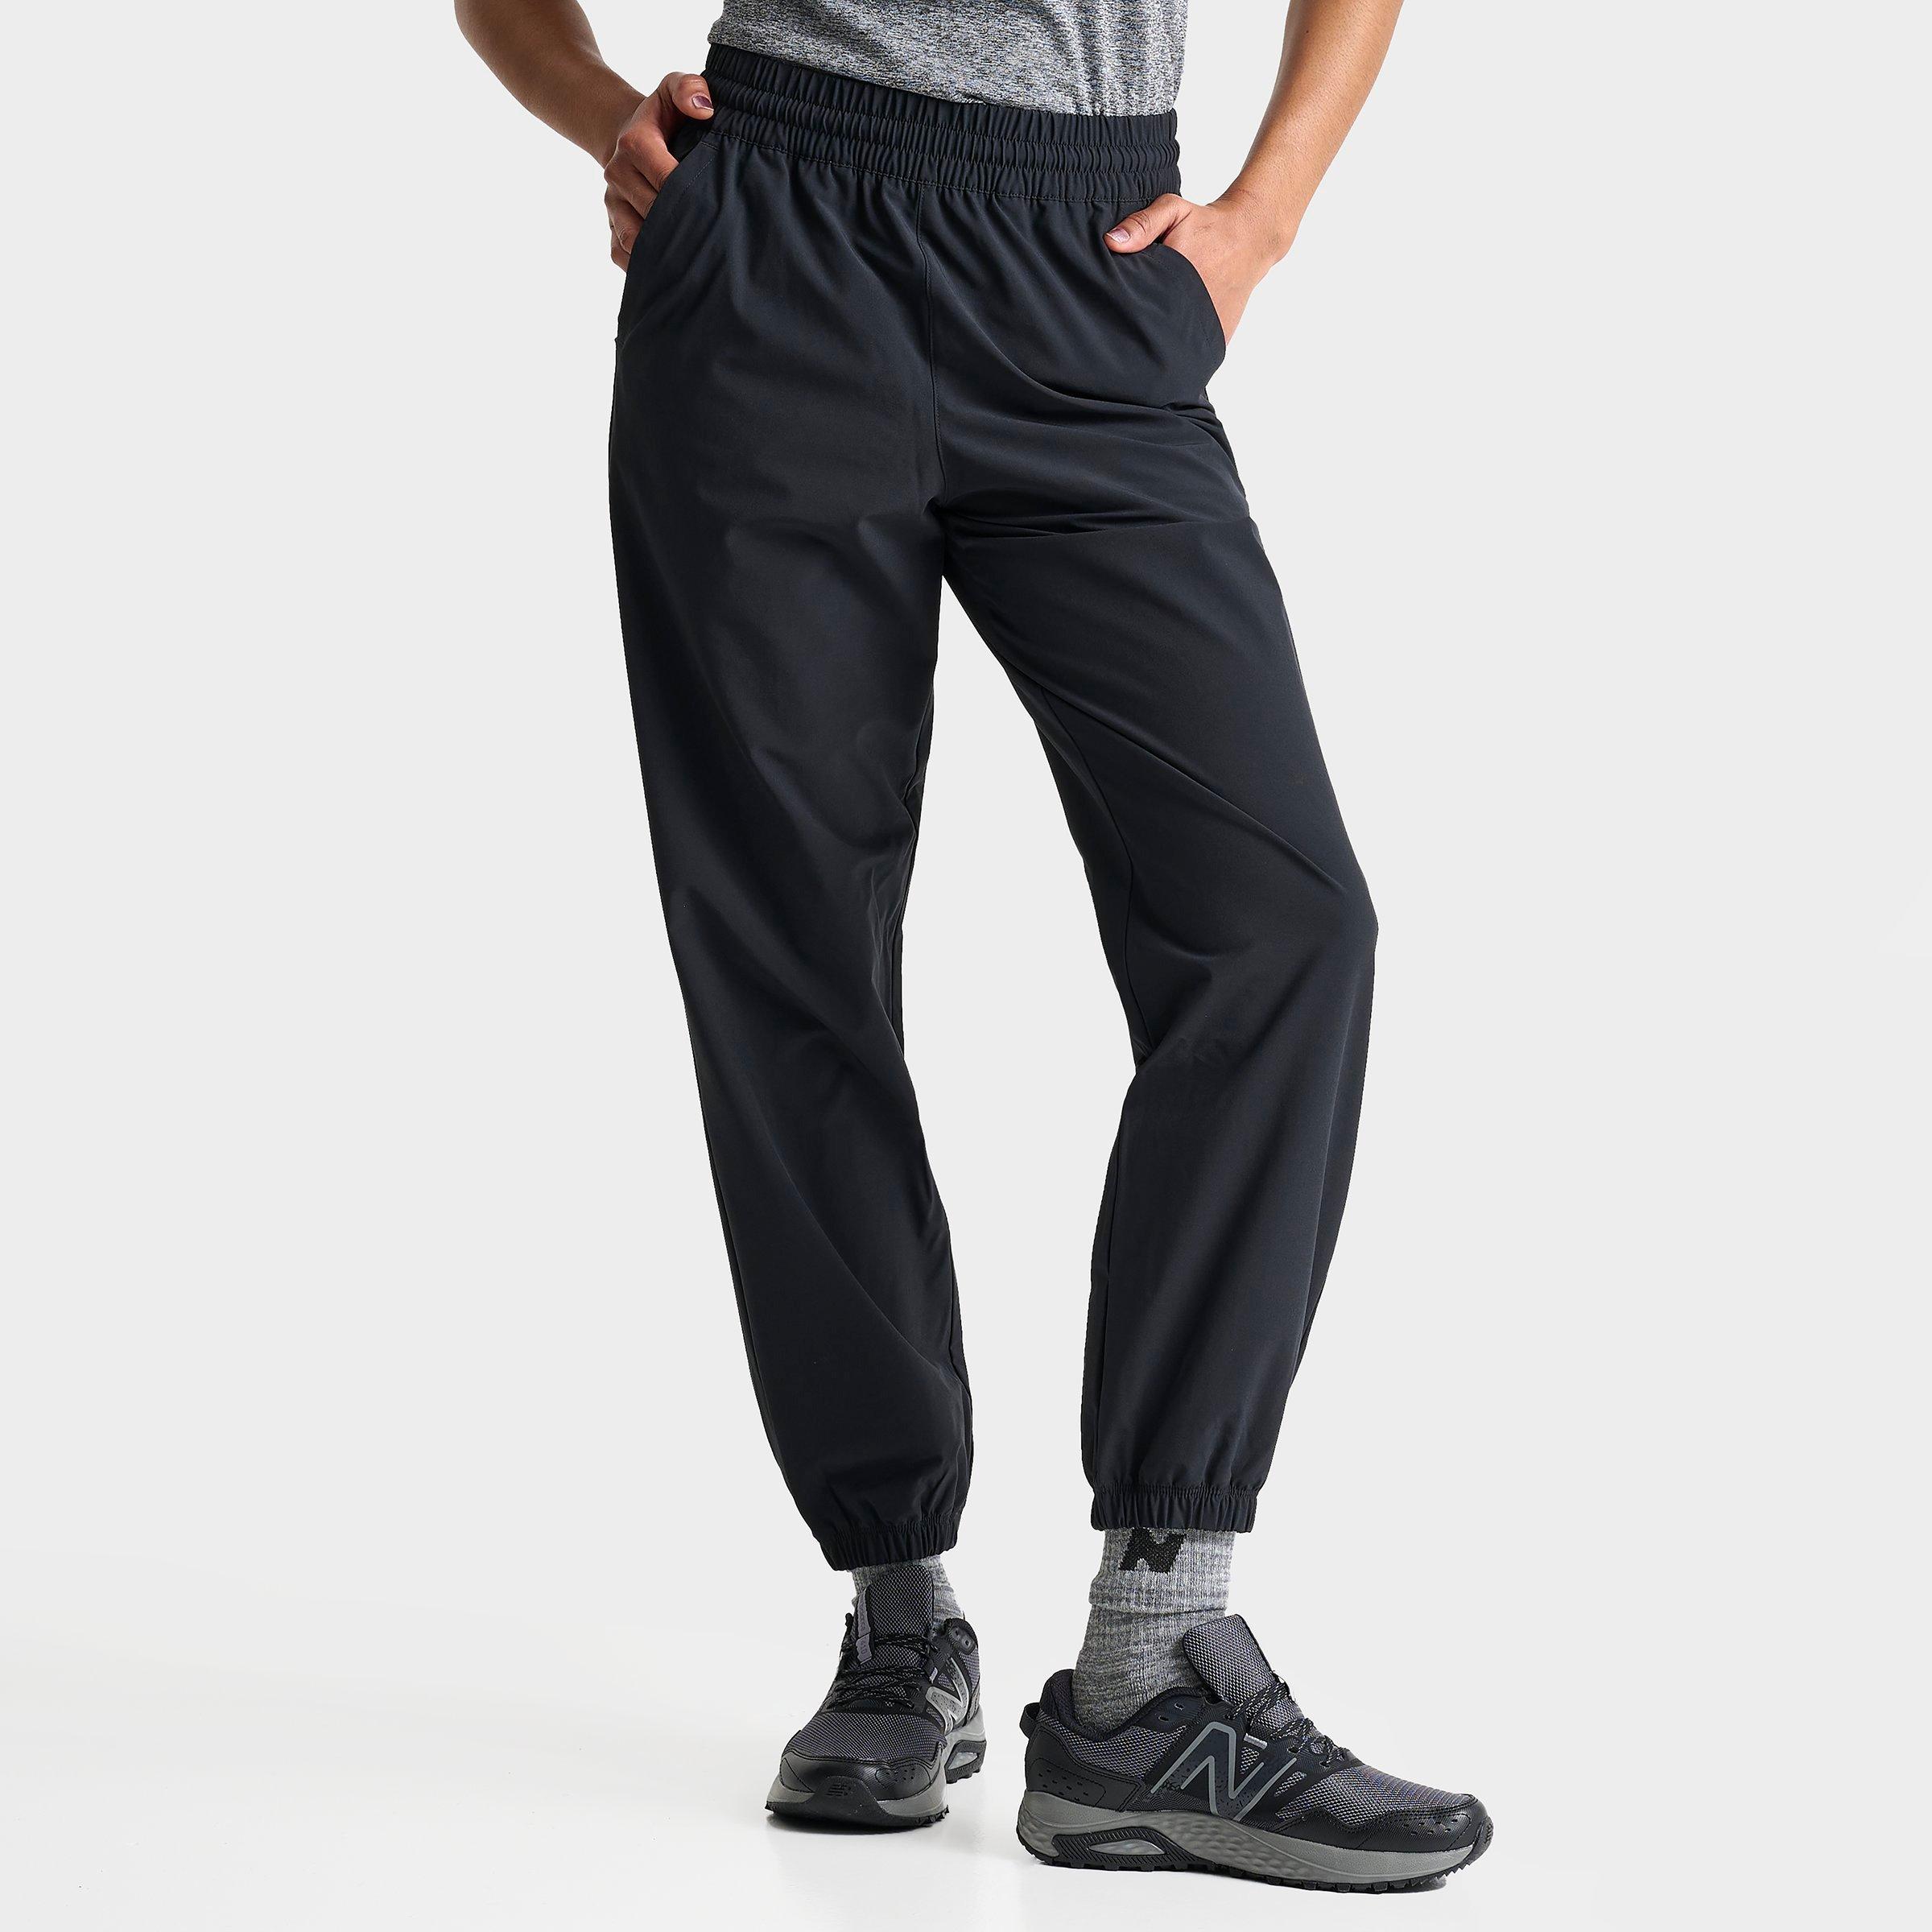 New Balance Women's Athletics Stretch Woven Jogger Pants In Black